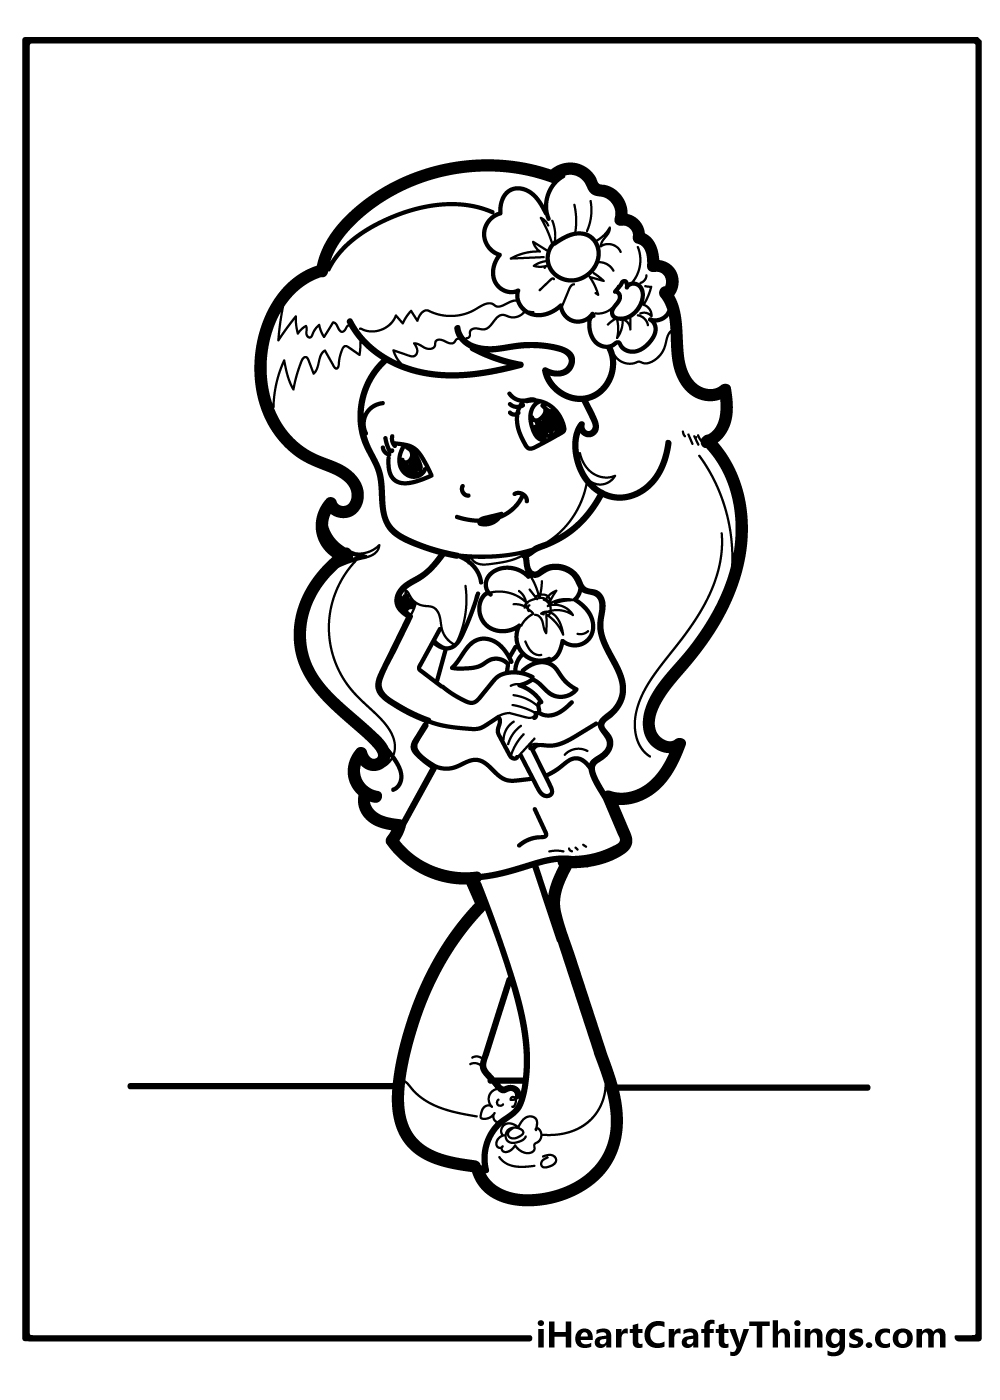 Strawberry Shortcake Coloring Pages for kids free download